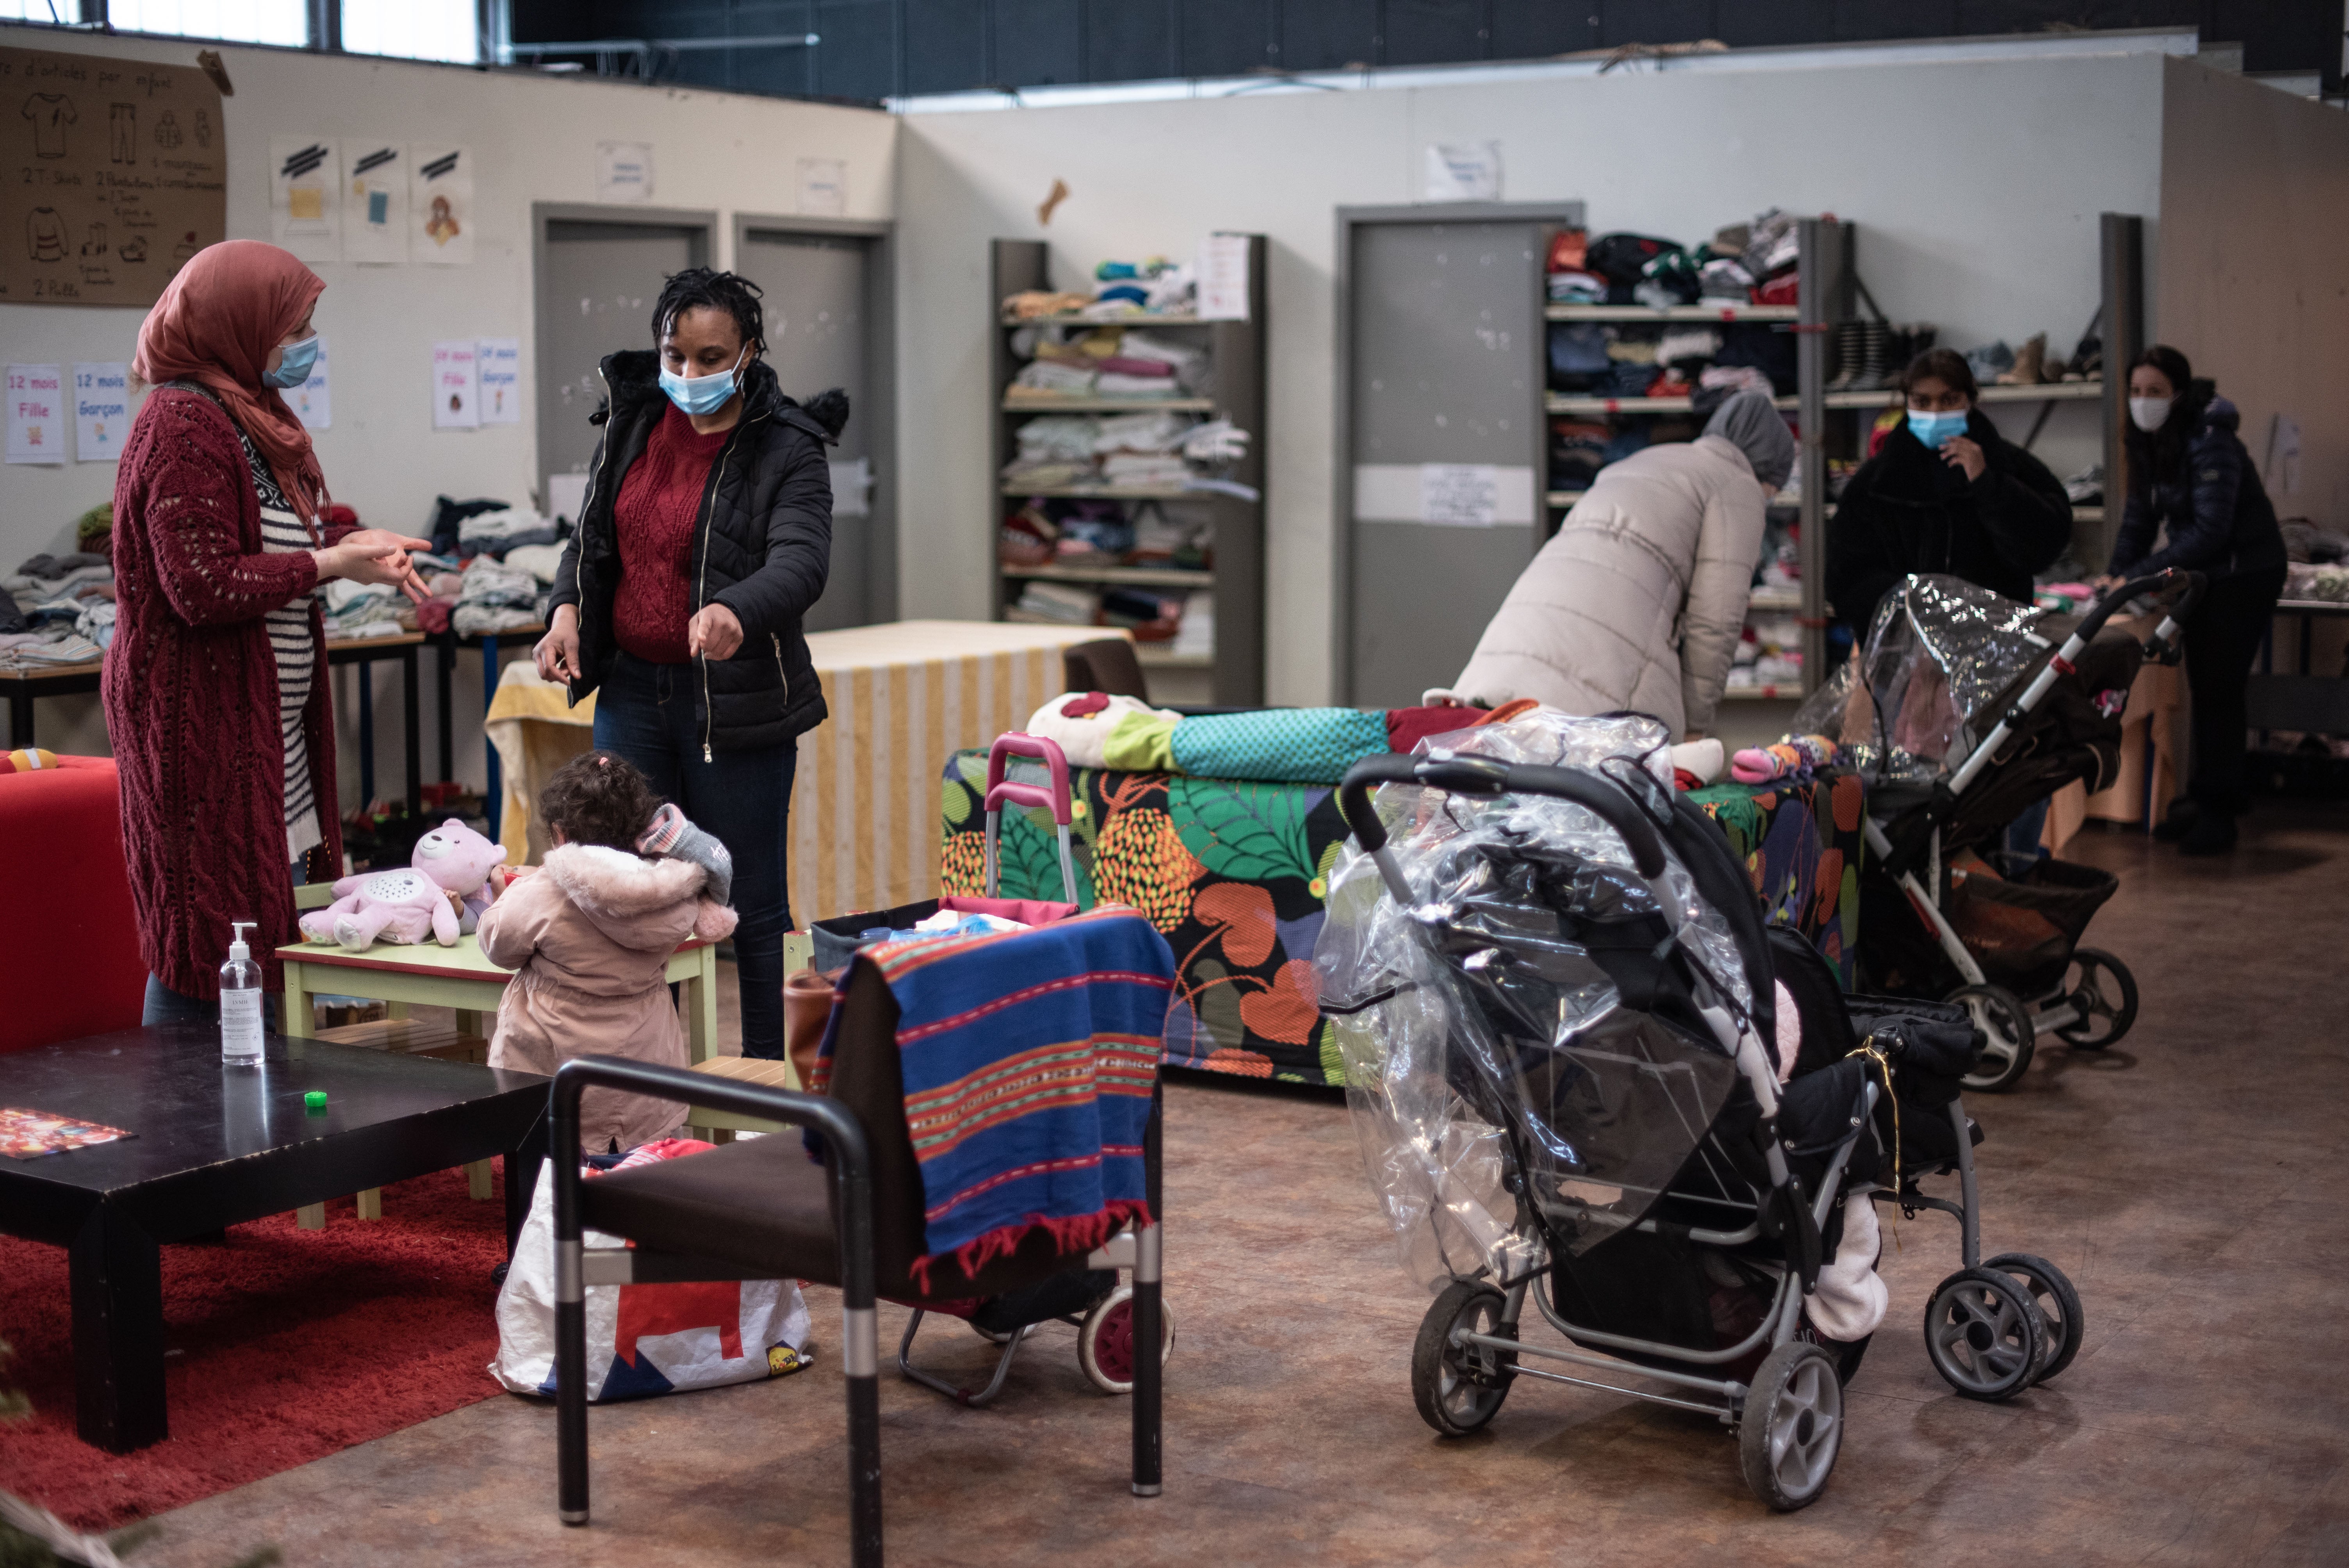 The MaMaMa association in Saint-Denis was set up during the first lockdown to provide mothers with food, clothes and other essentials